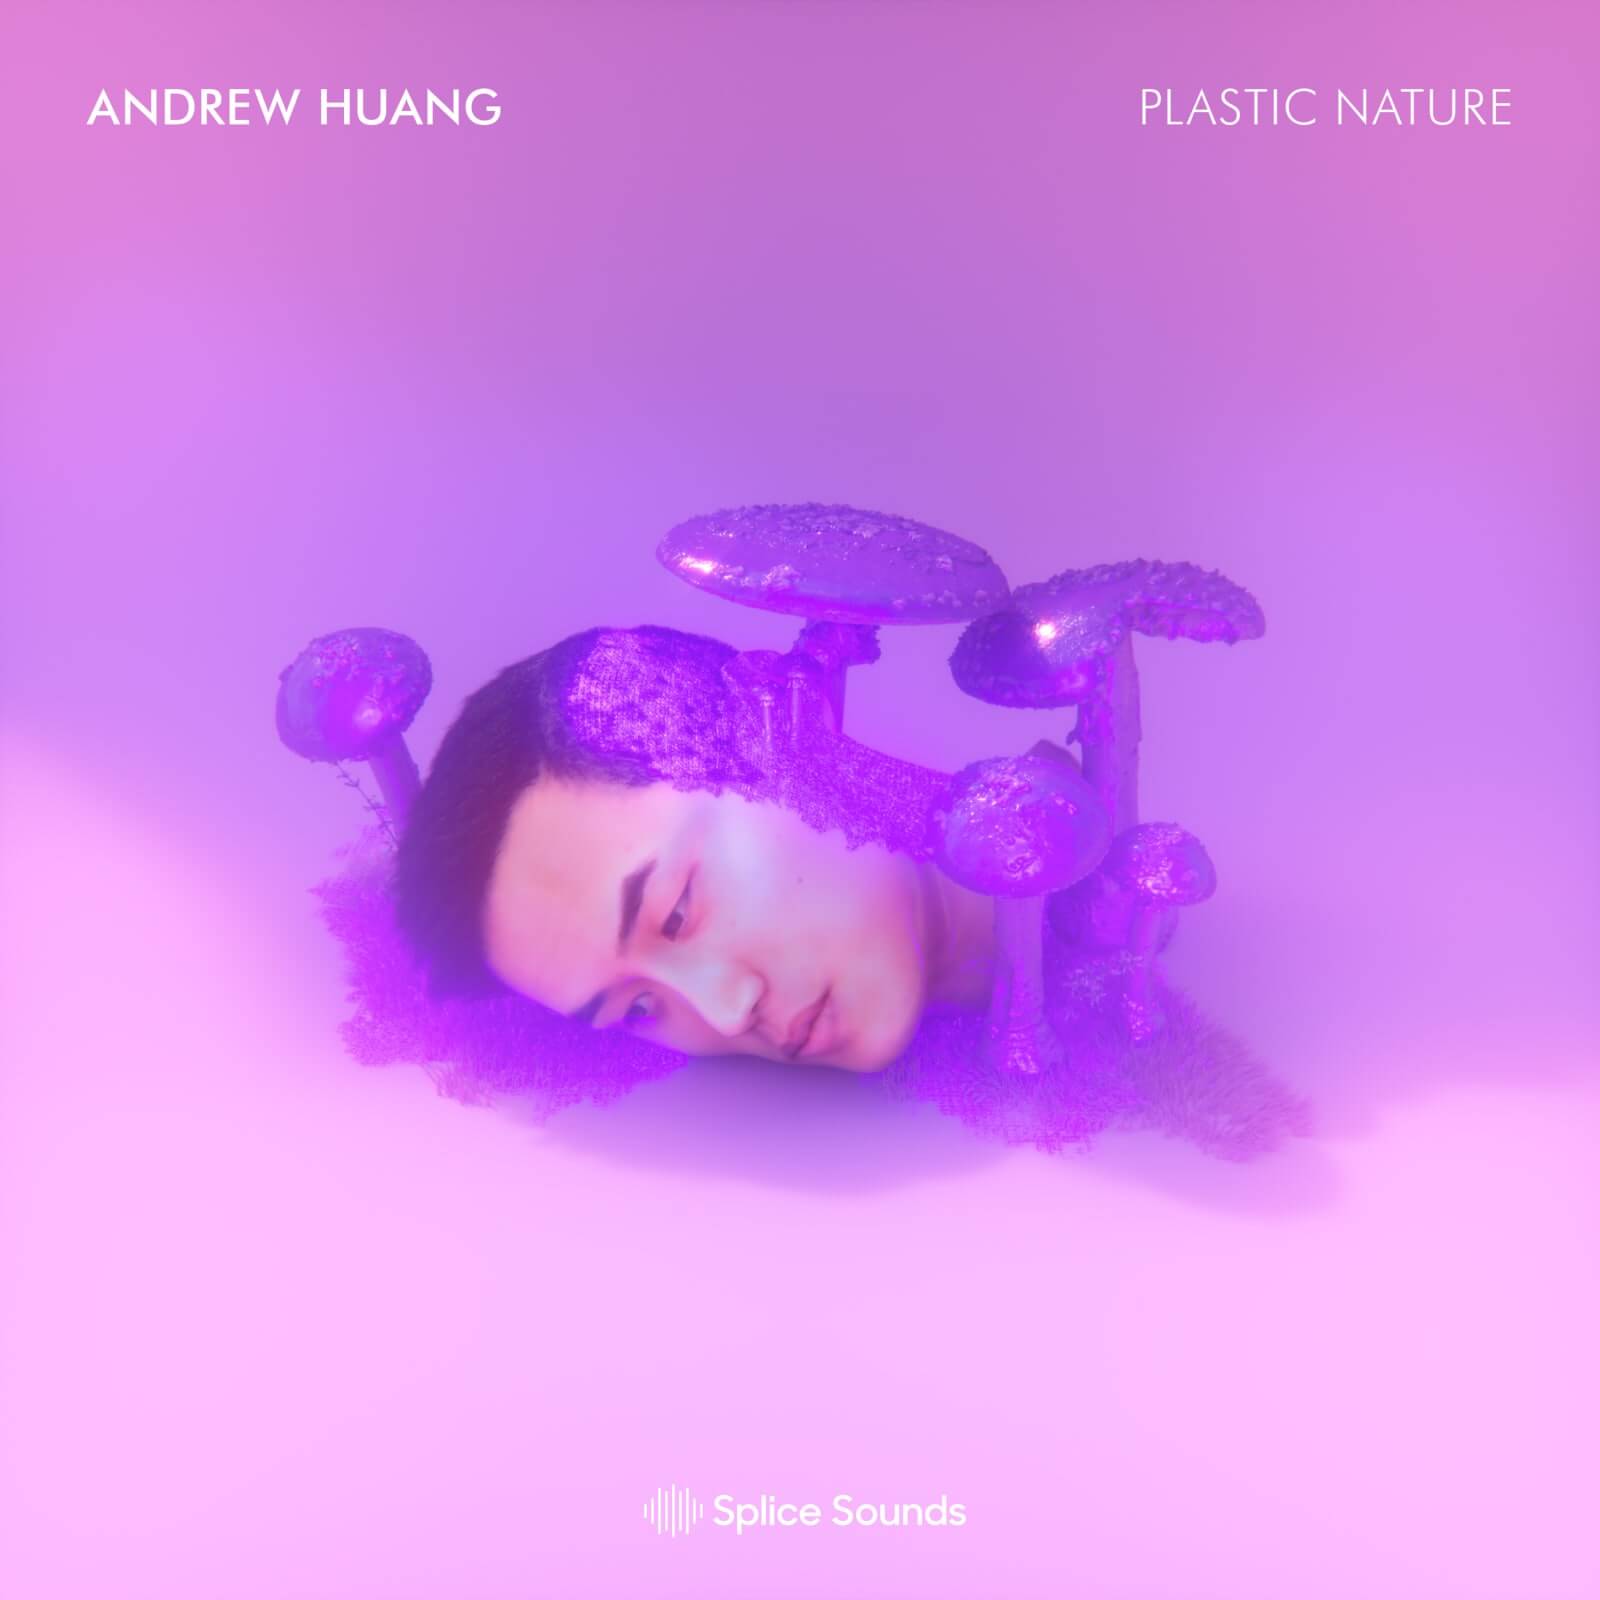 Plastic Nature pack by Huang from Splice